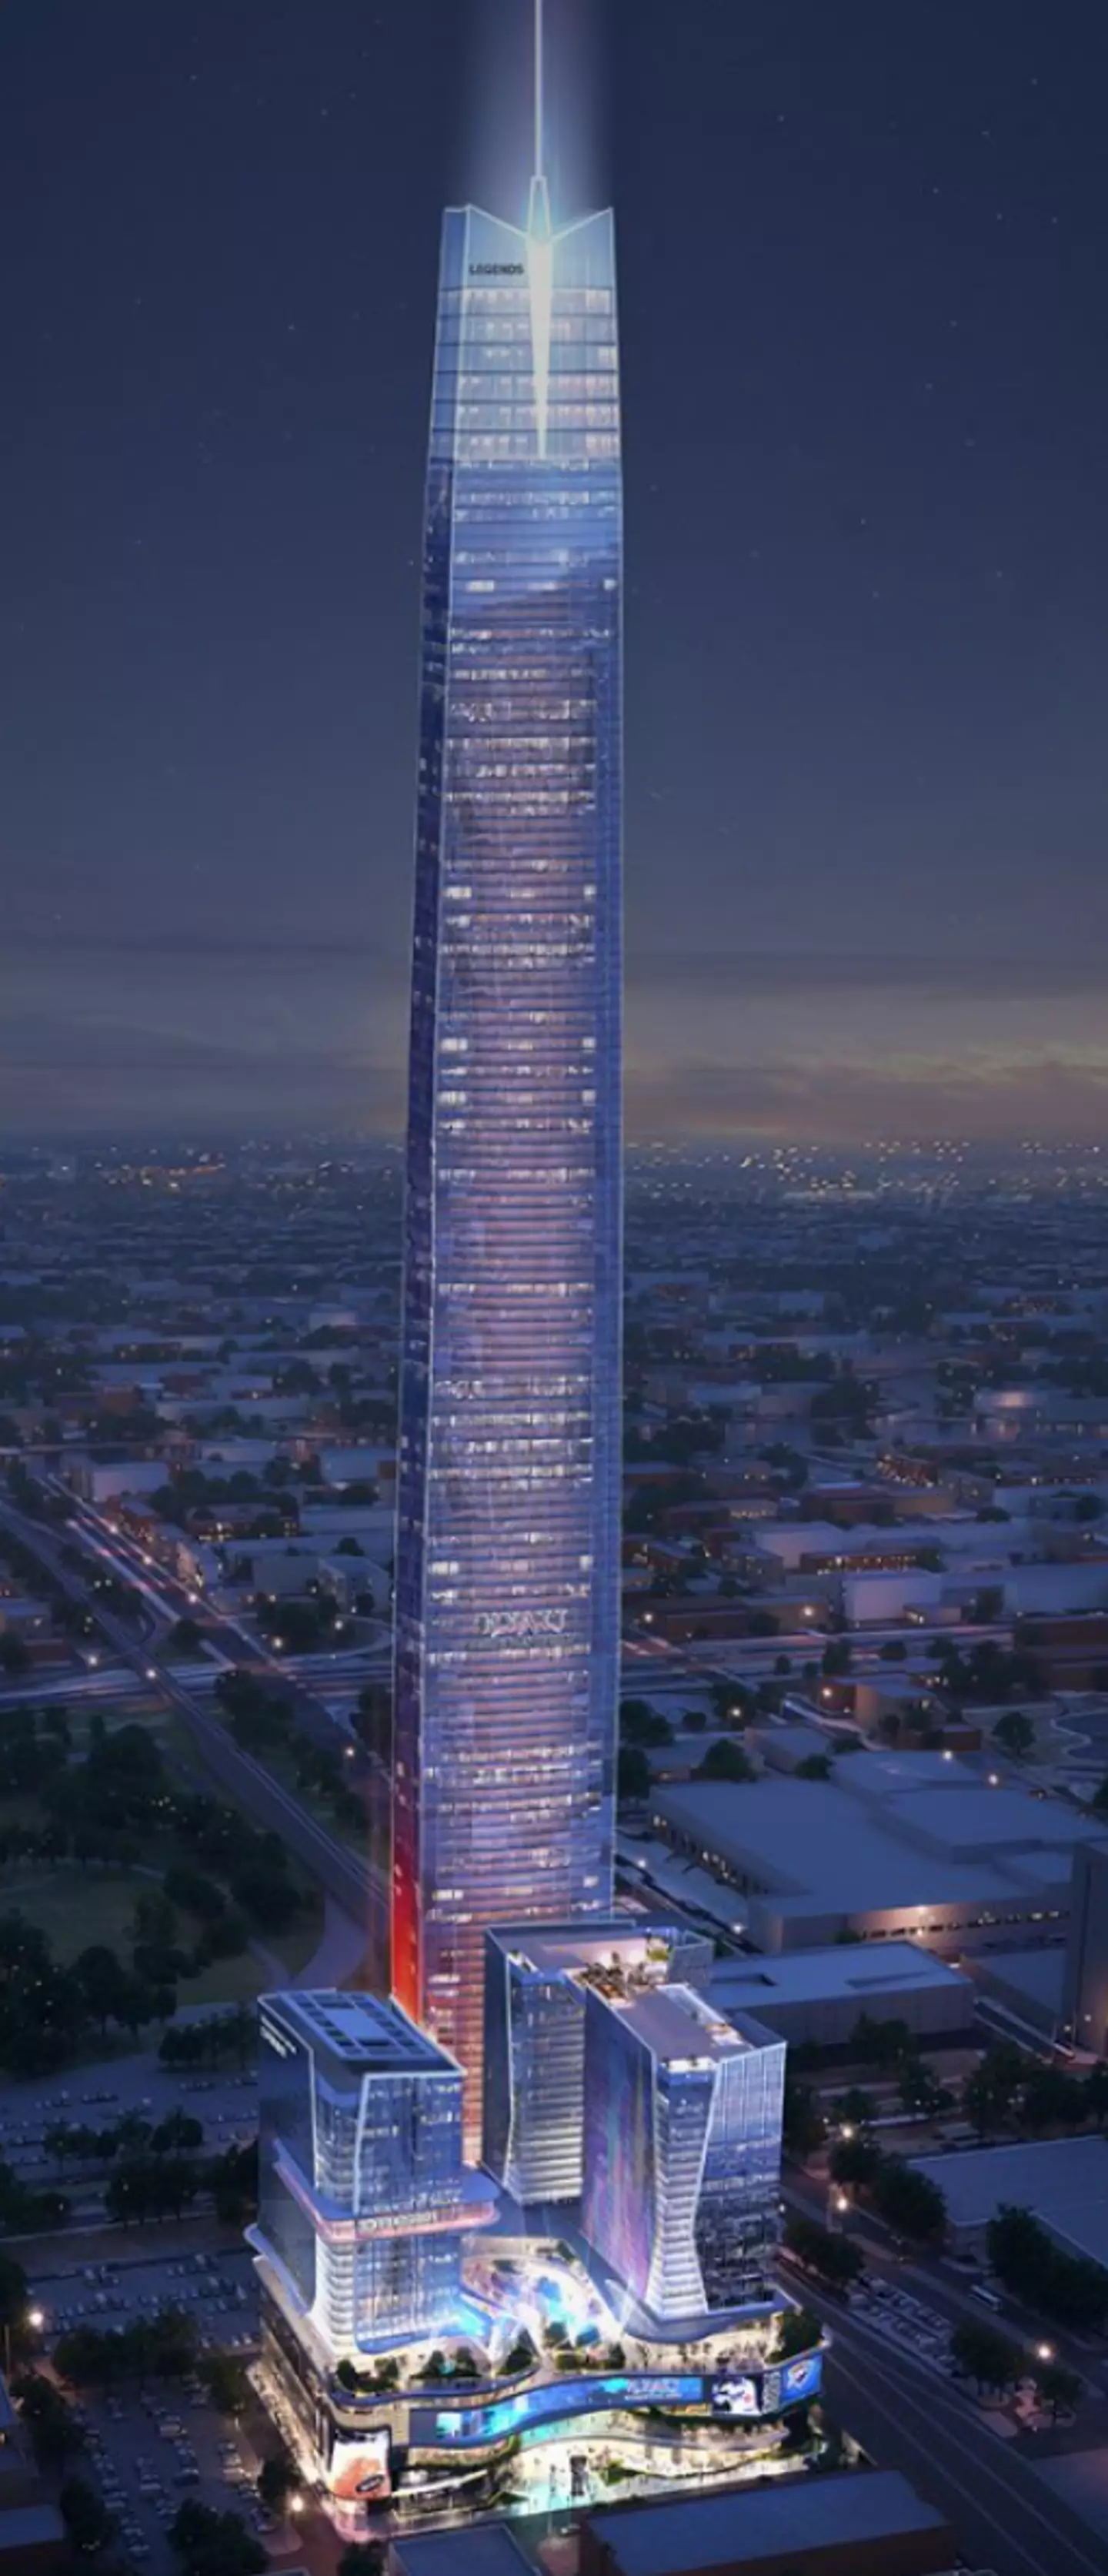 A new skyscraper has been proposed to be built in Oklahoma.